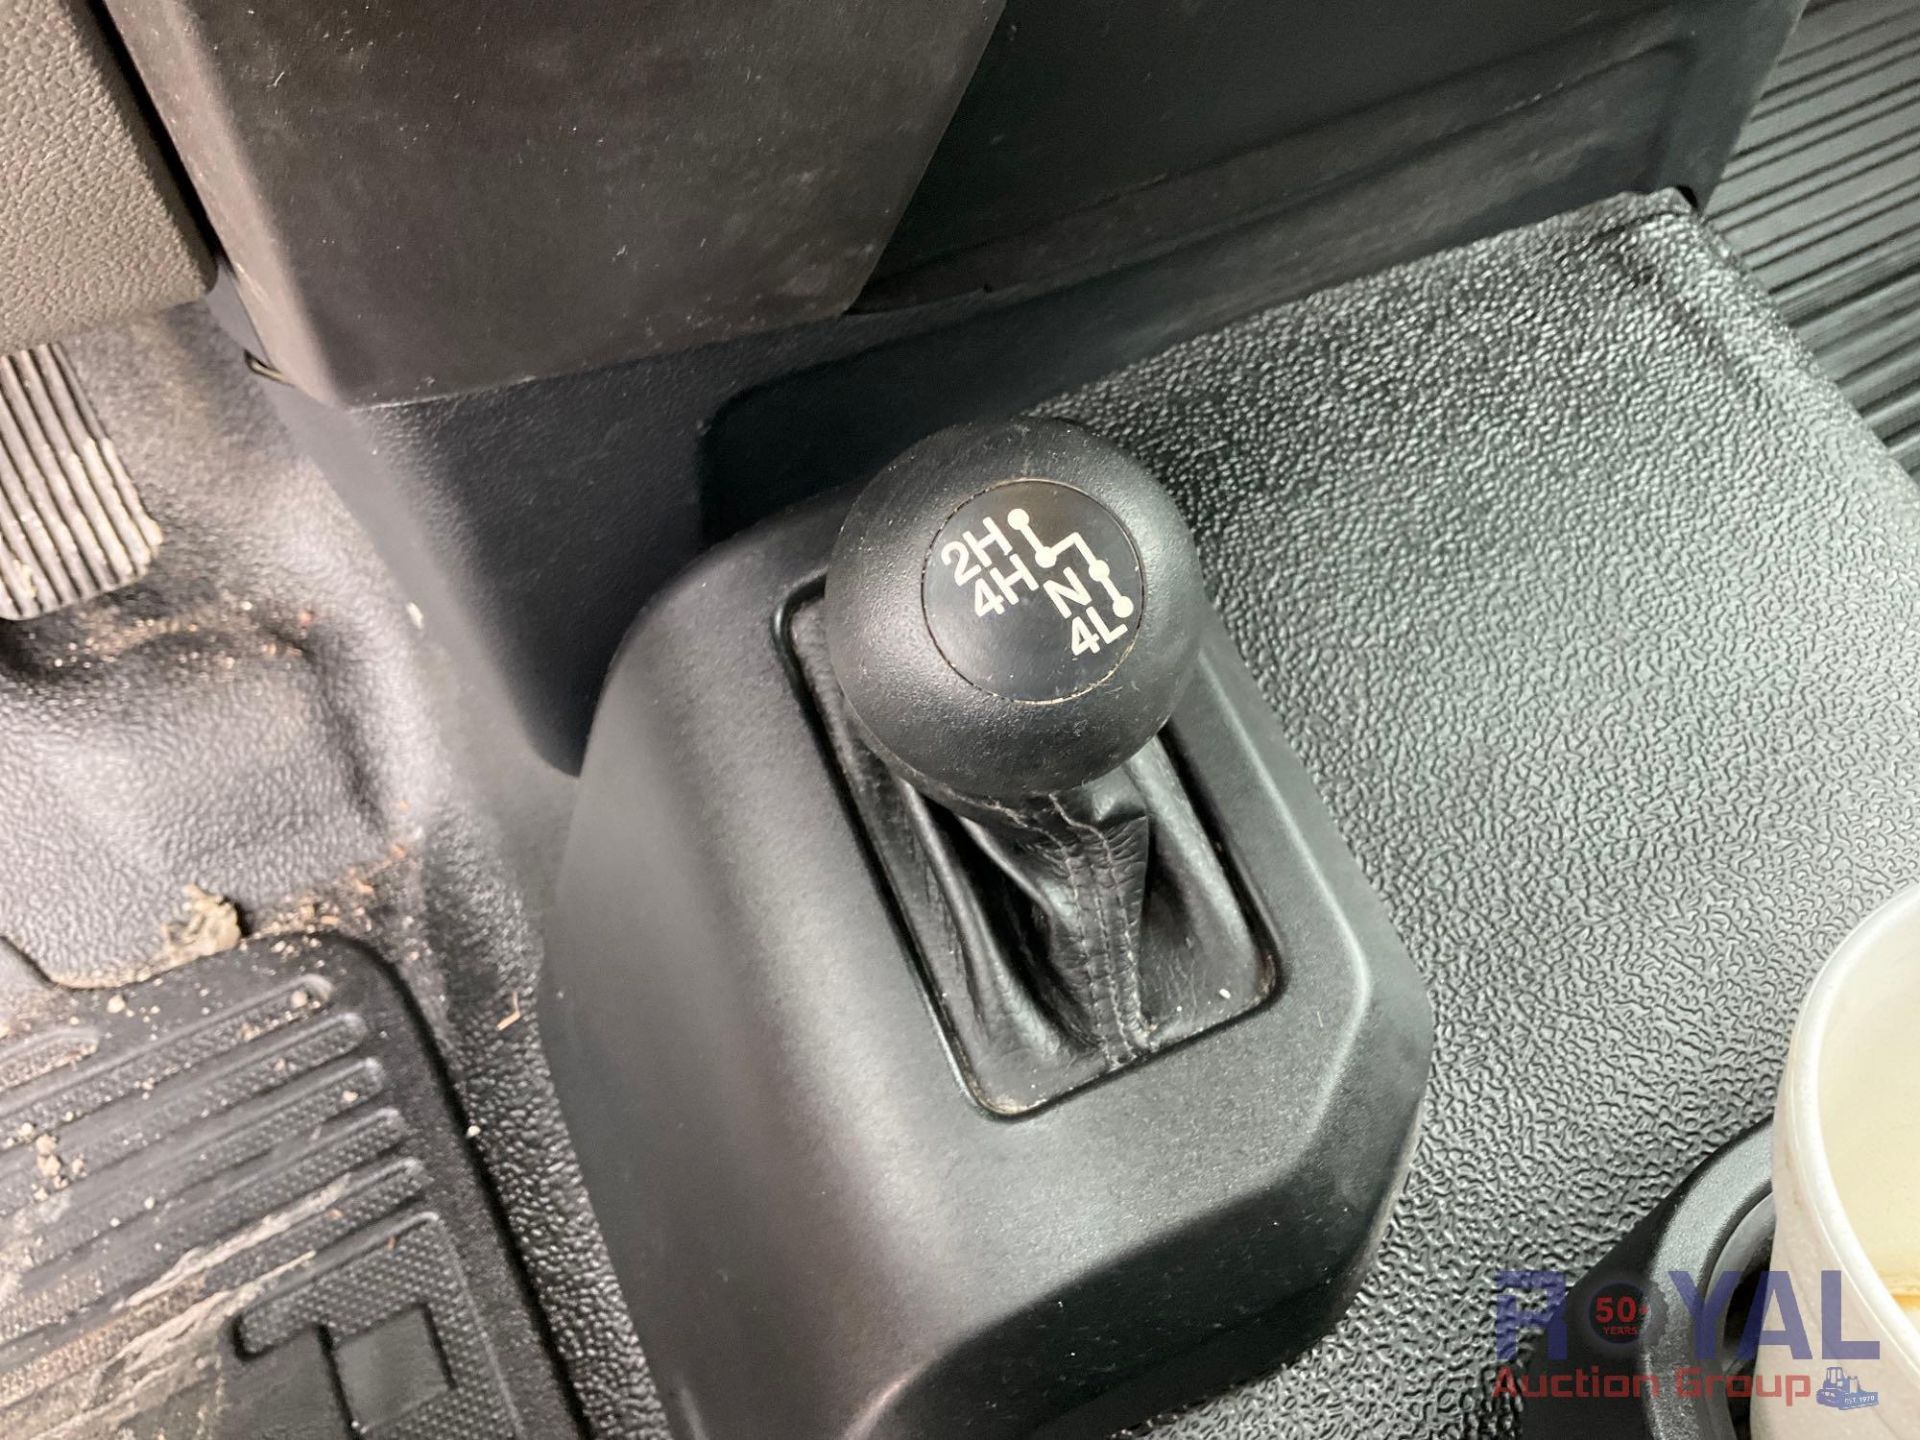 2019 Ford F350 4x4 Service Truck - Image 28 of 30